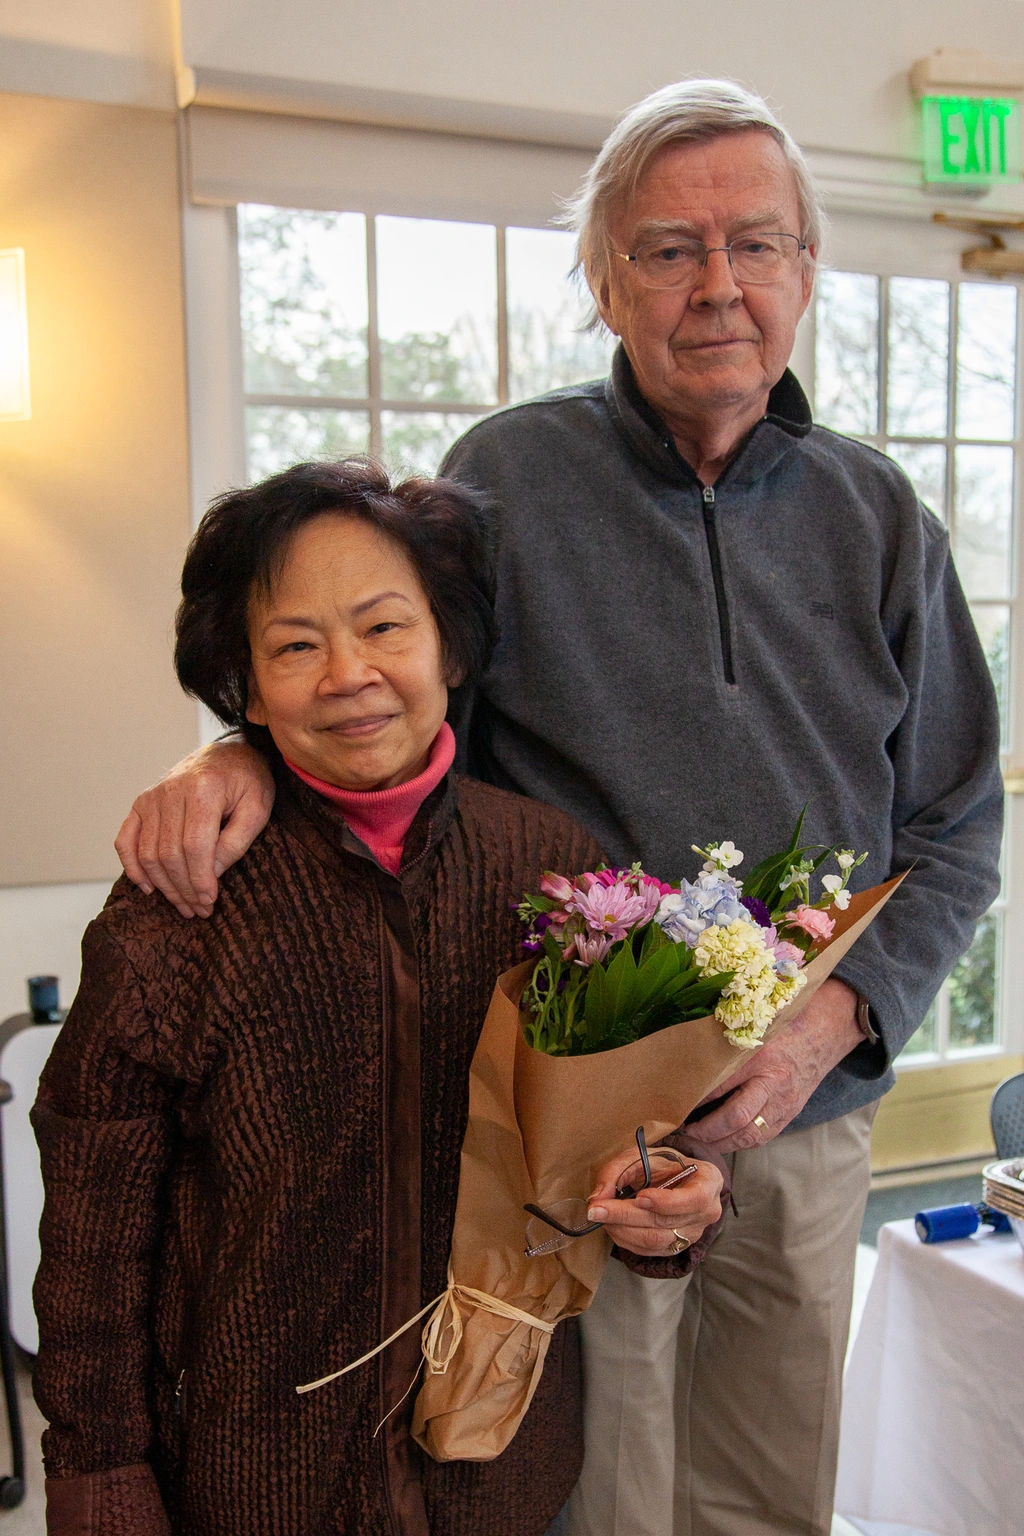 Bjorn and Susana at their retirement party